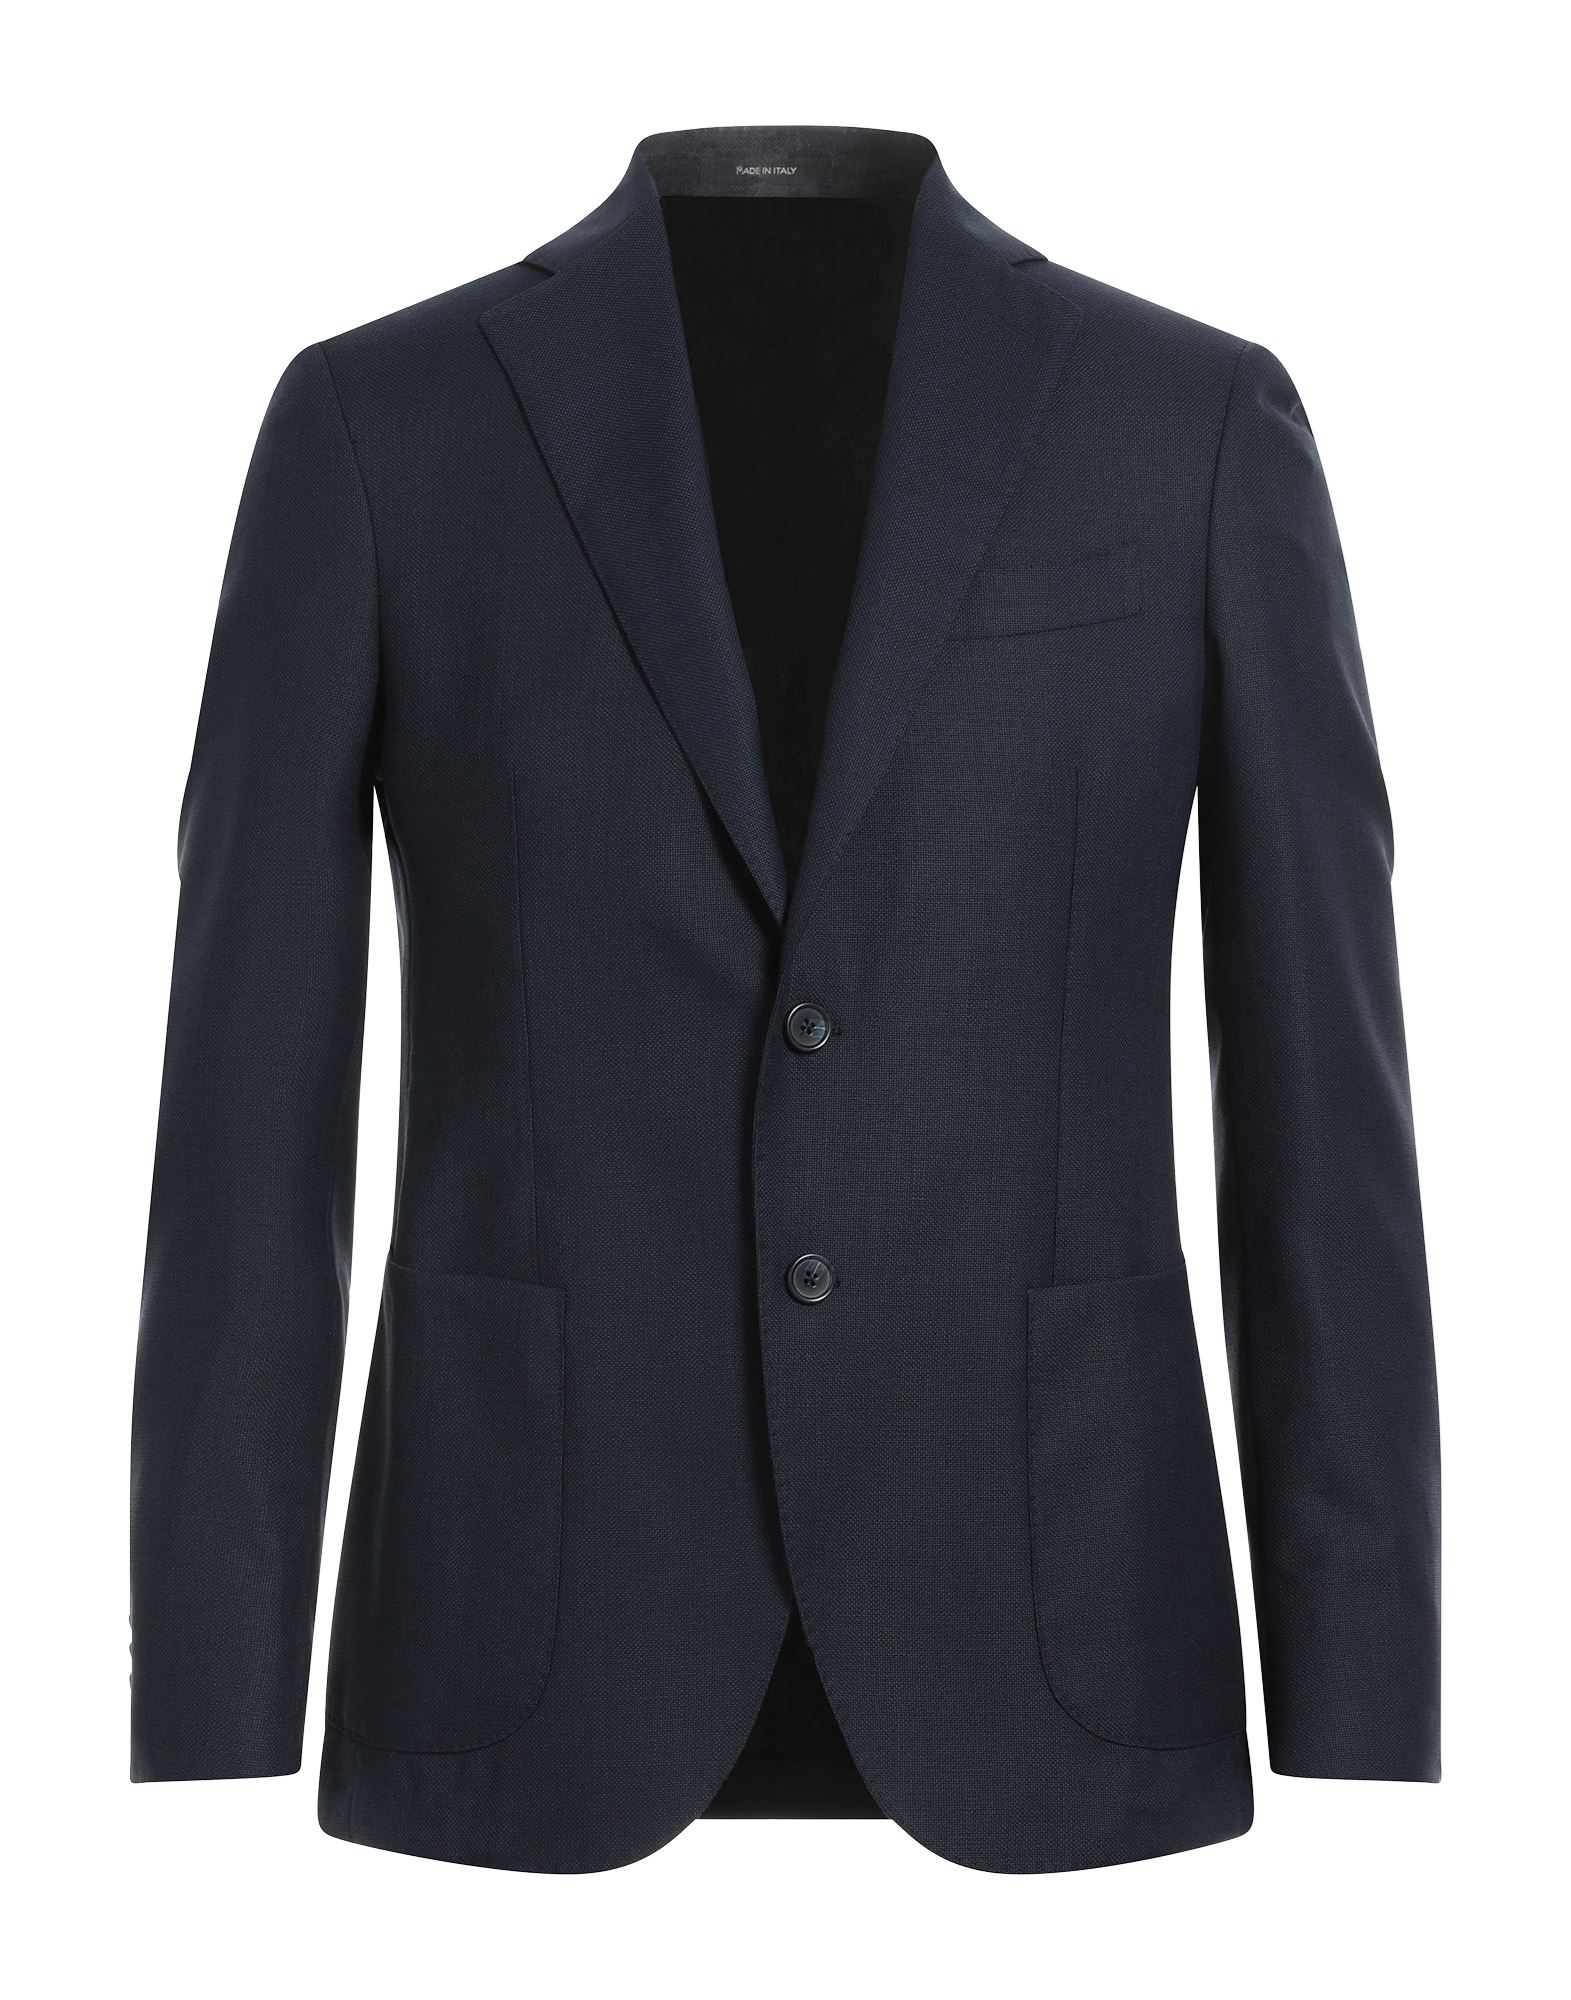 Angelo Nardelli Suit Jackets In Navy Blue